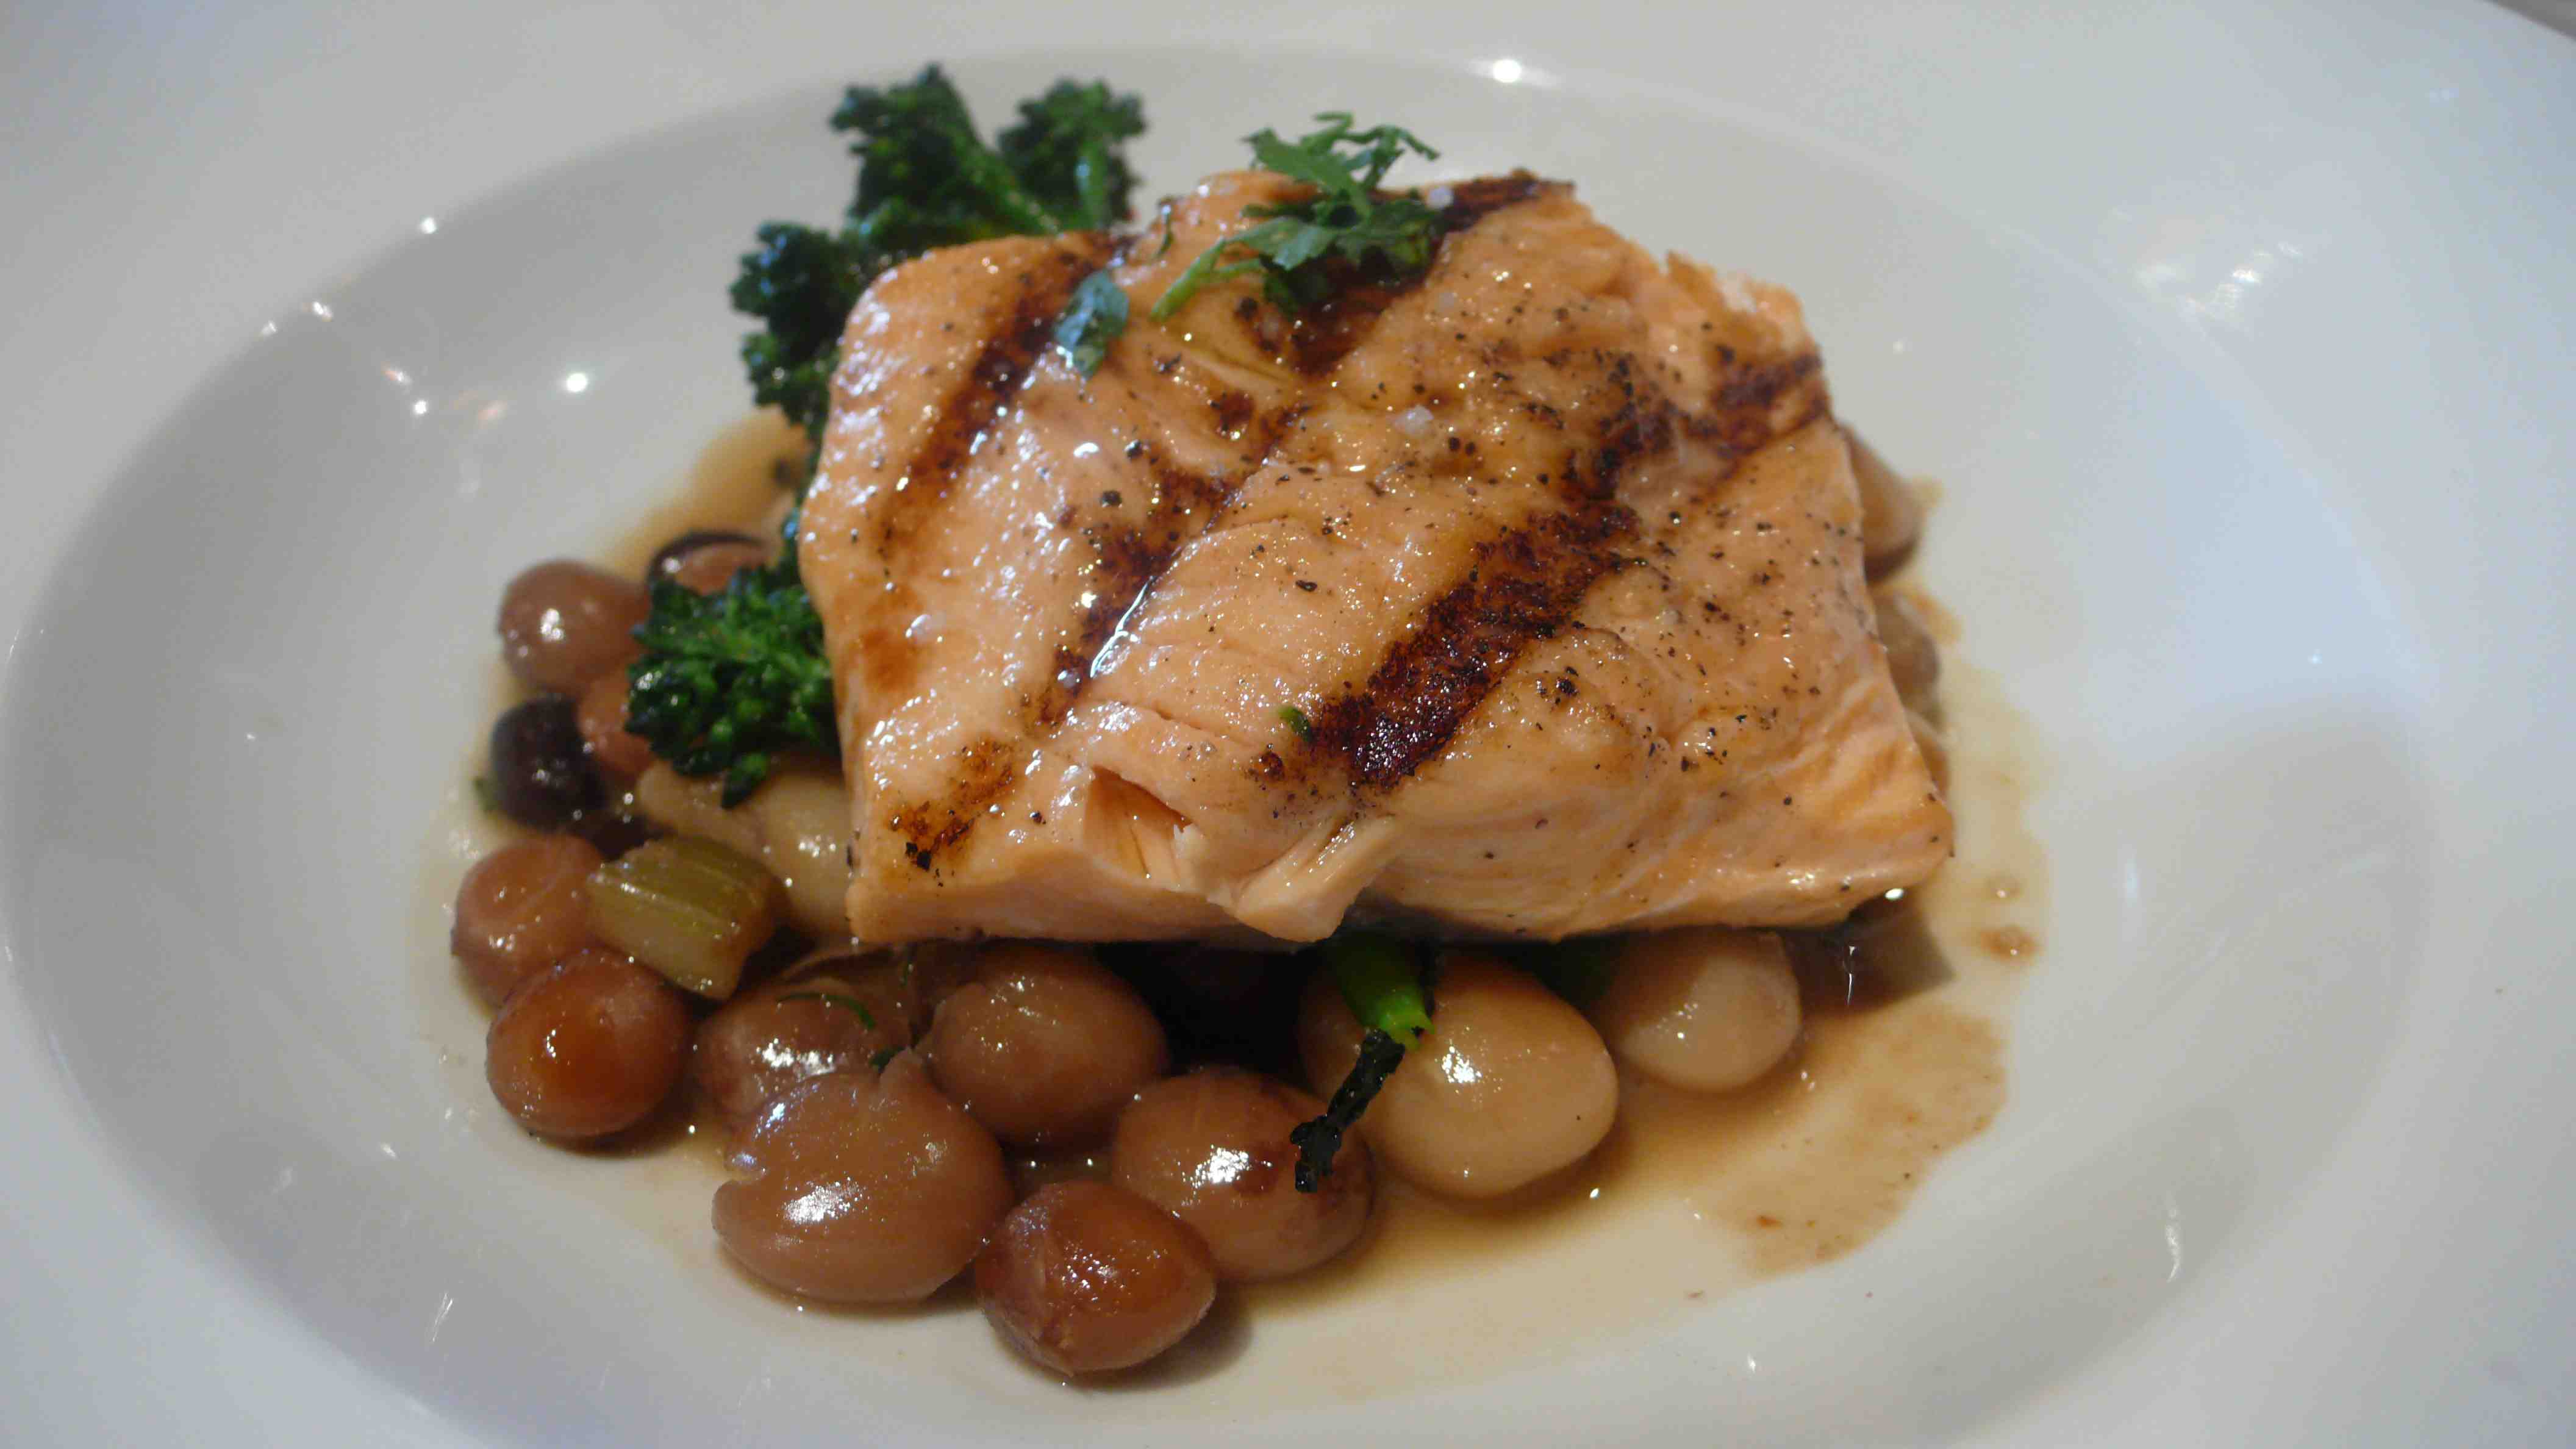 Grilled artic char with five bean ragu